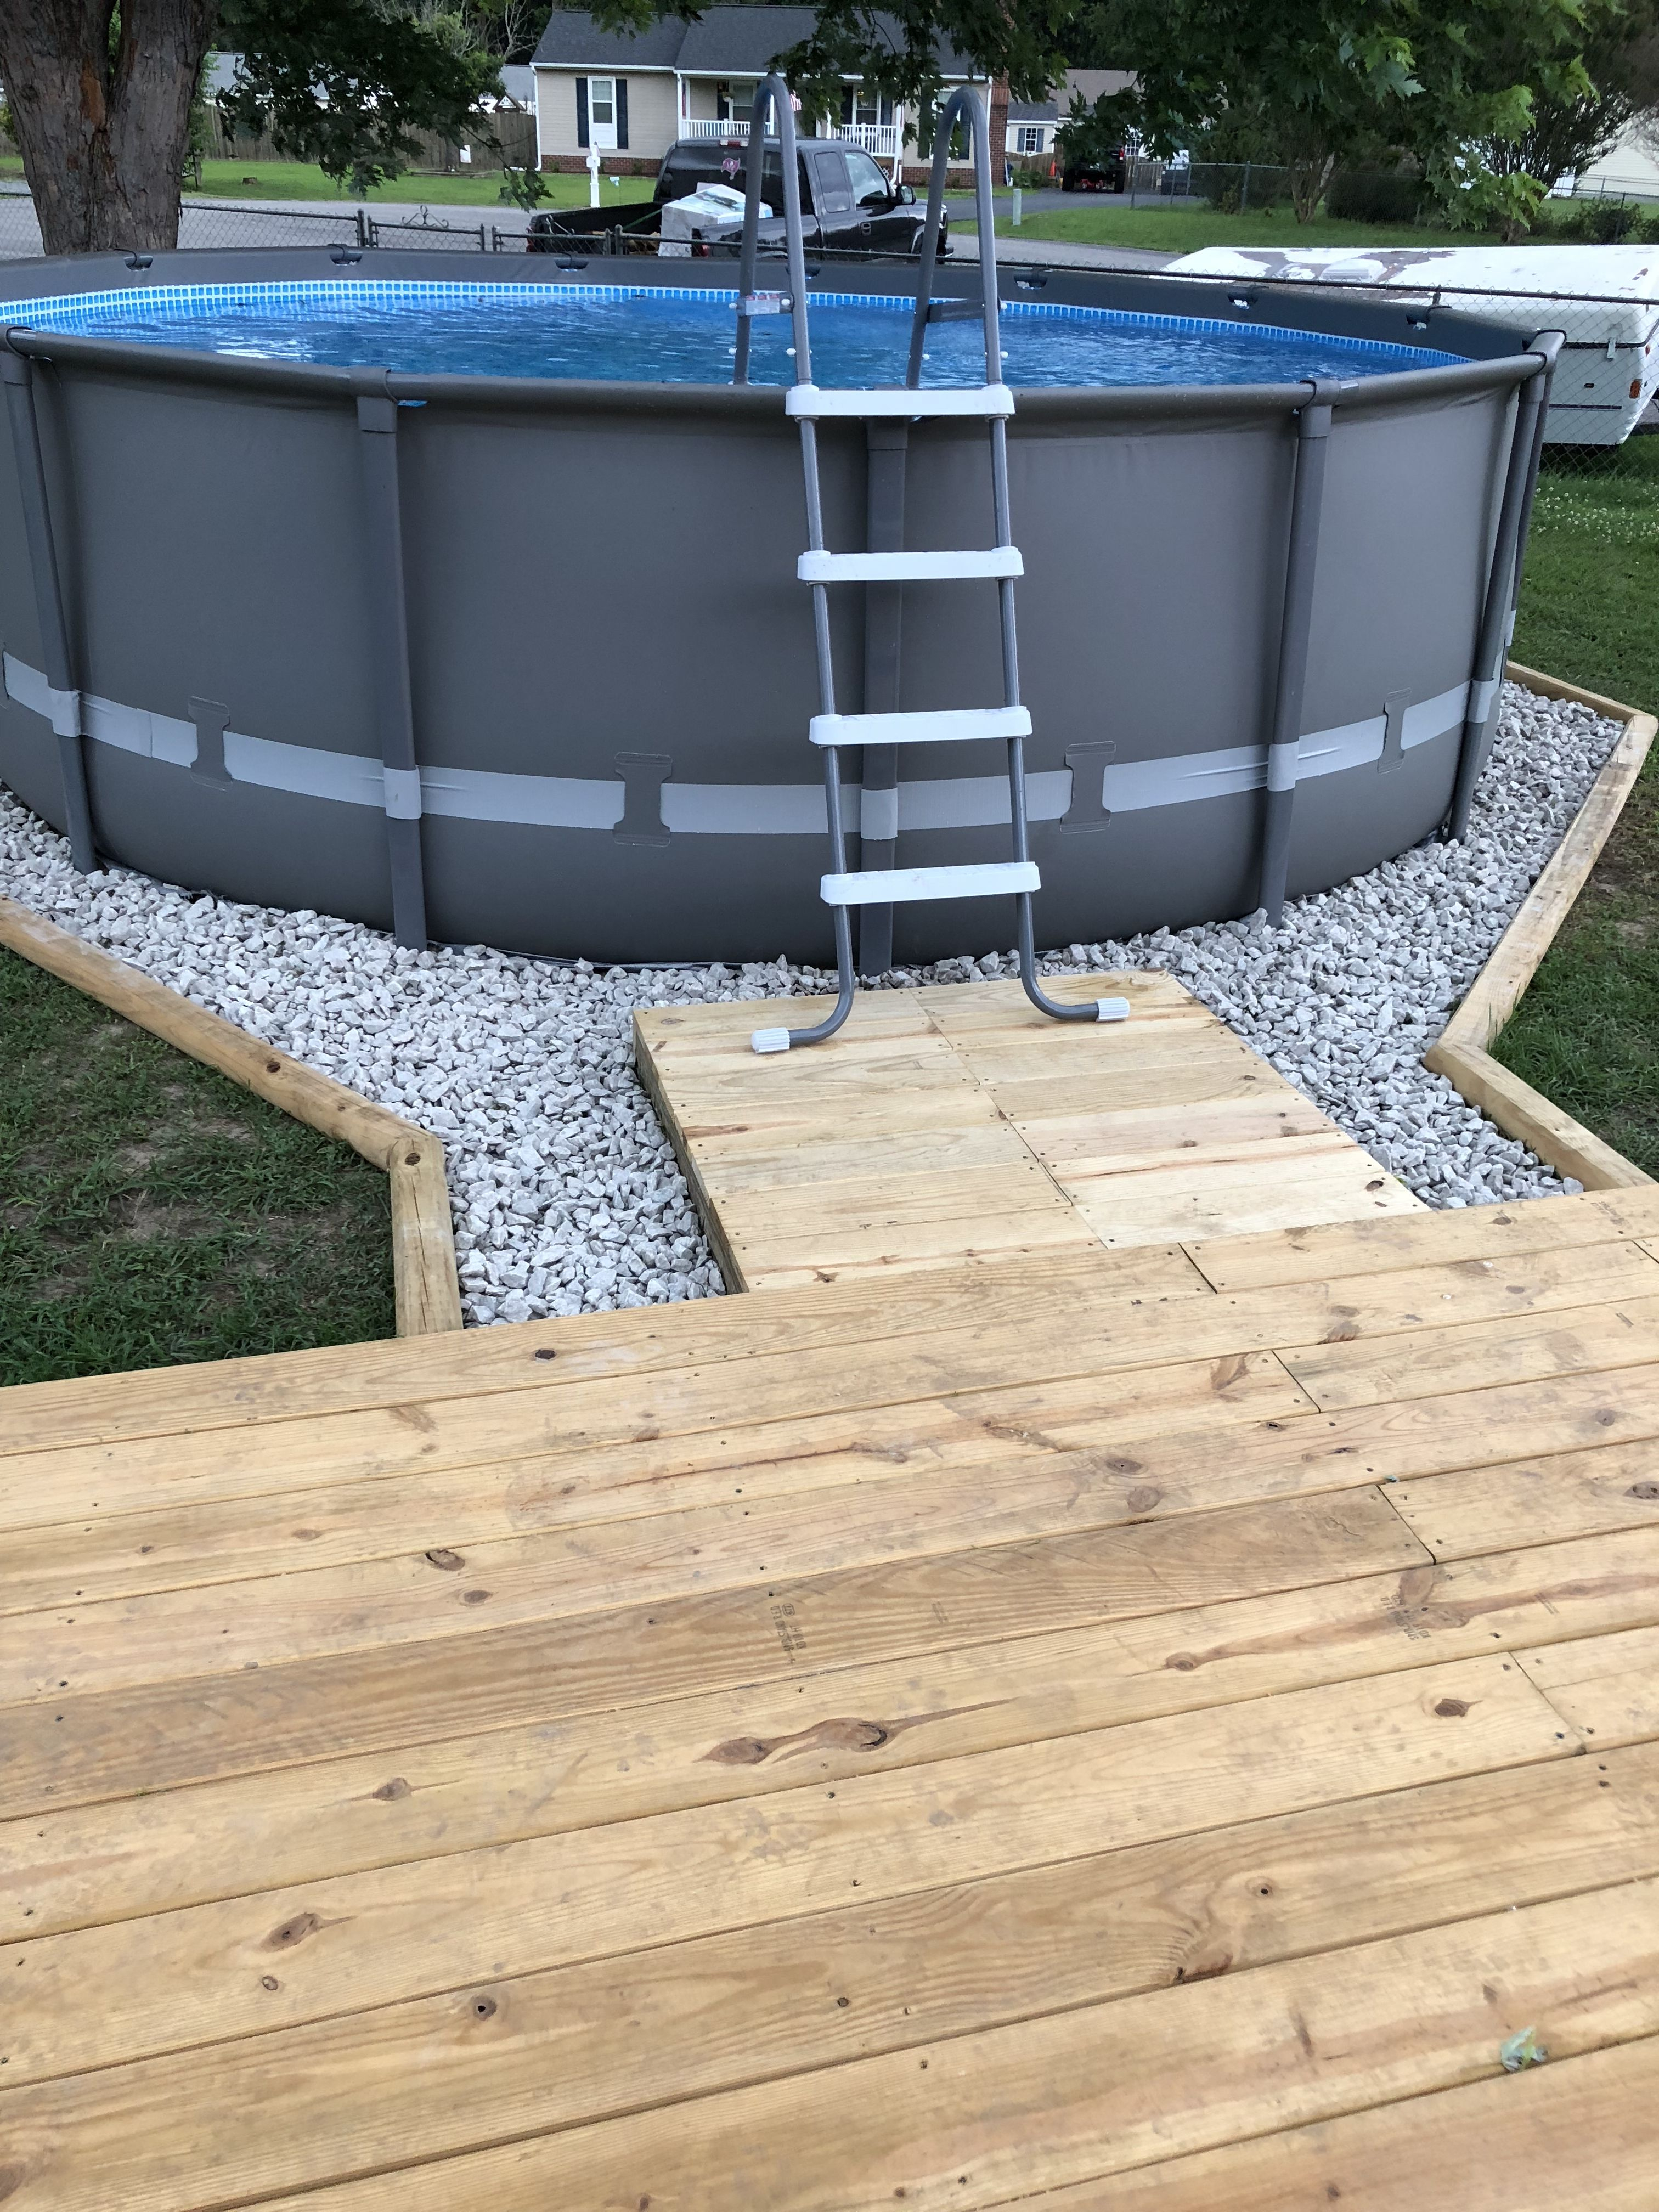 Our Intex Pool Landscape Project Backyard In 2019 Pool throughout dimensions 3024 X 4032